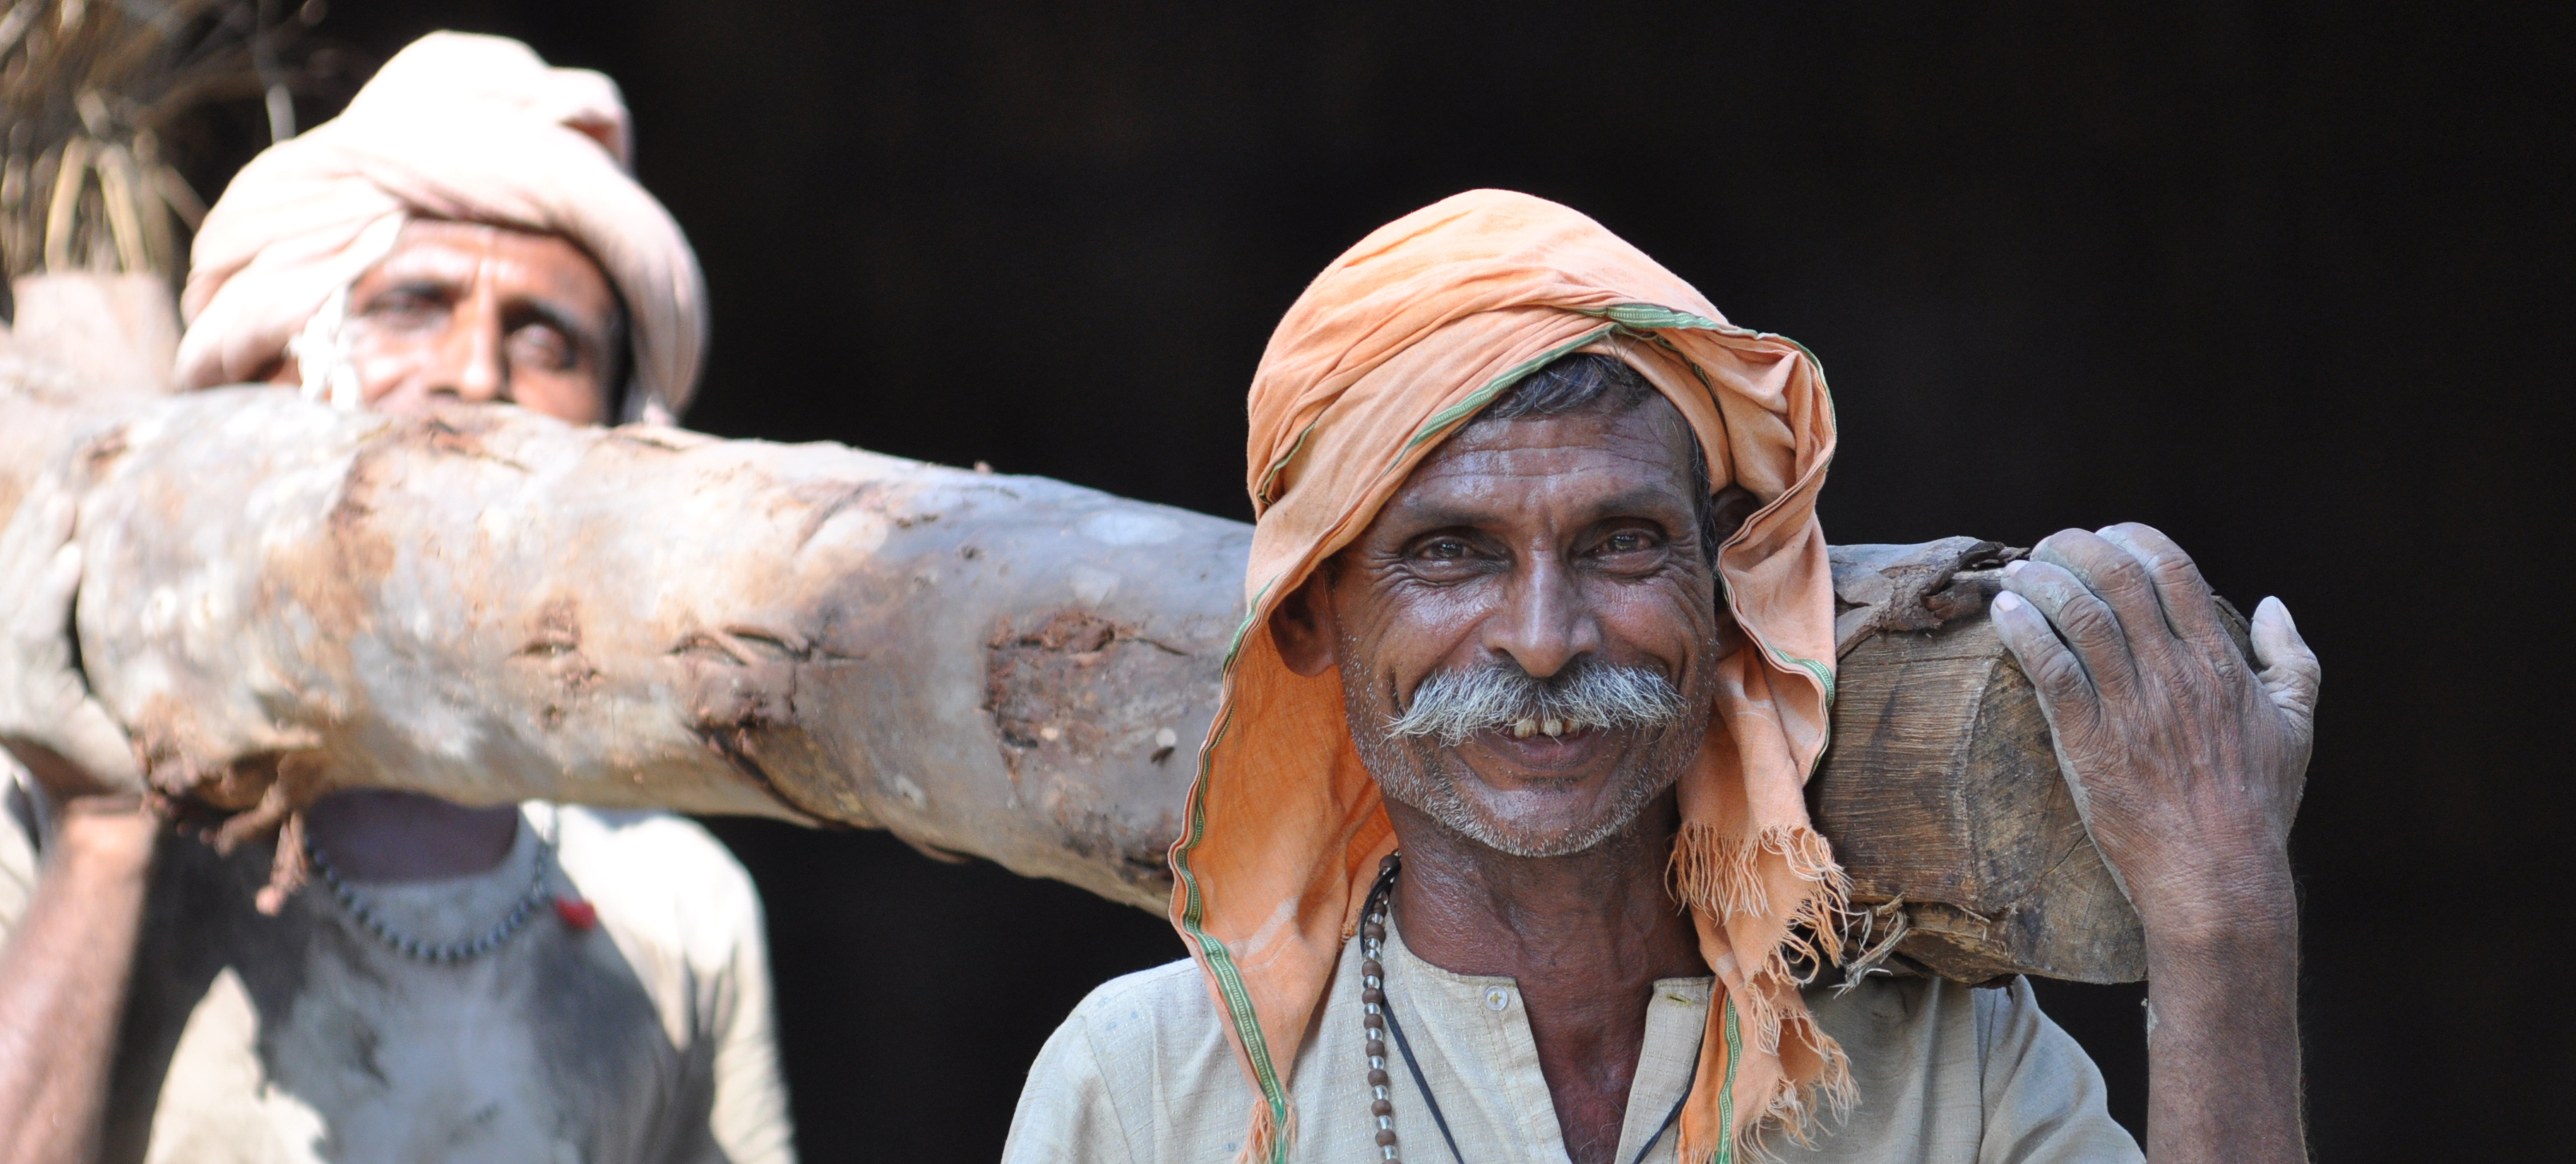 two Indian men carry a felled log and smile for photo